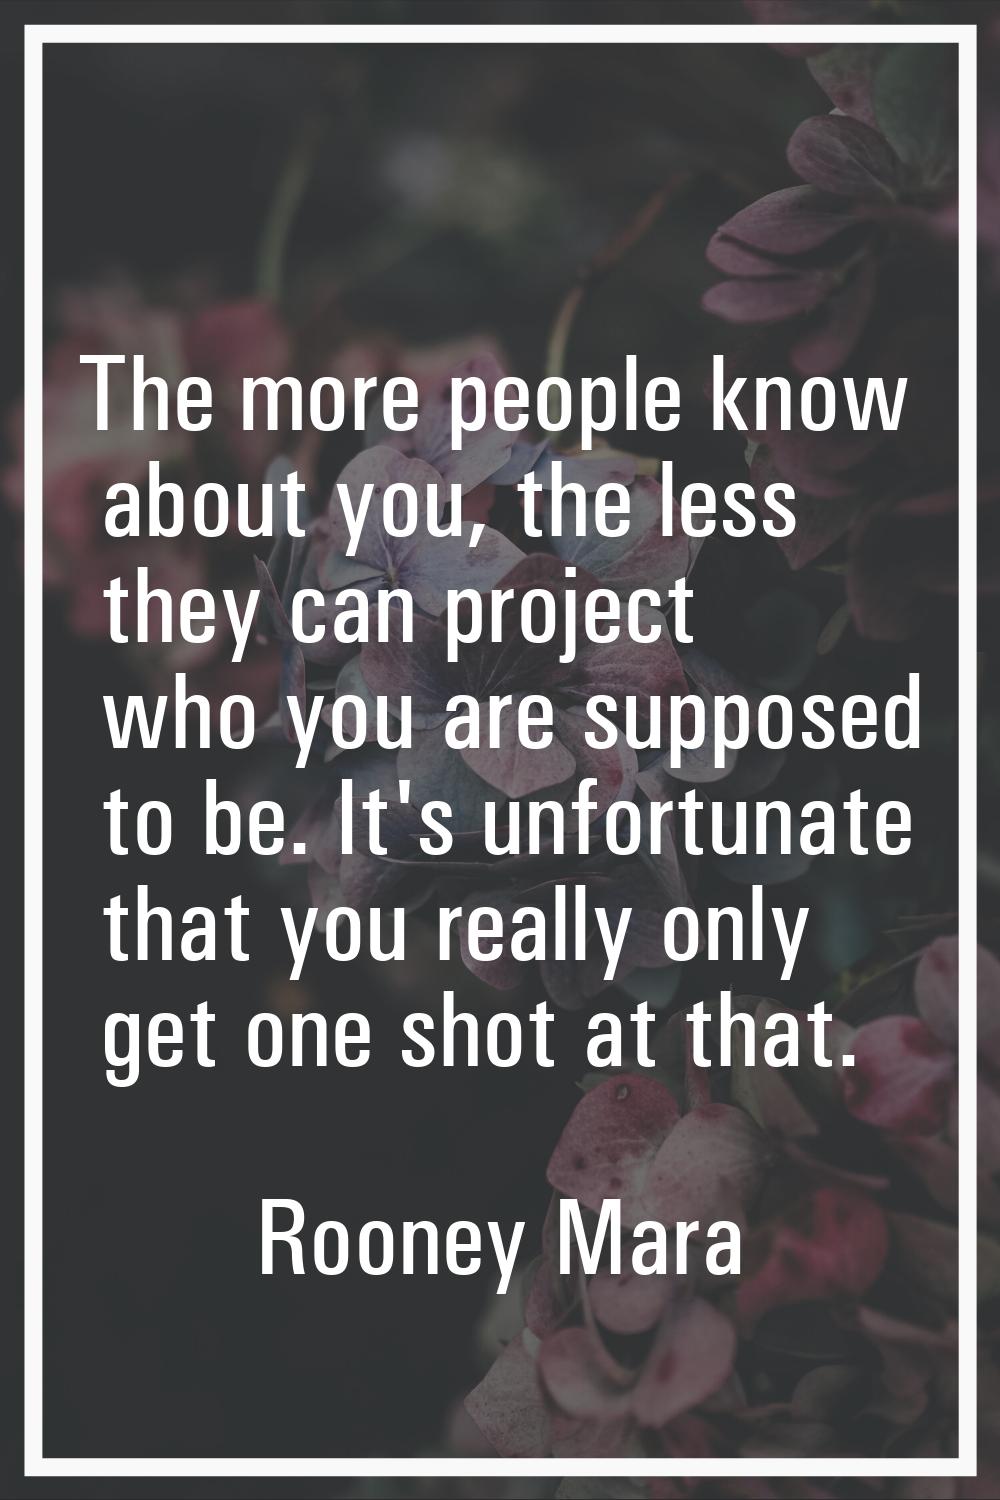 The more people know about you, the less they can project who you are supposed to be. It's unfortun